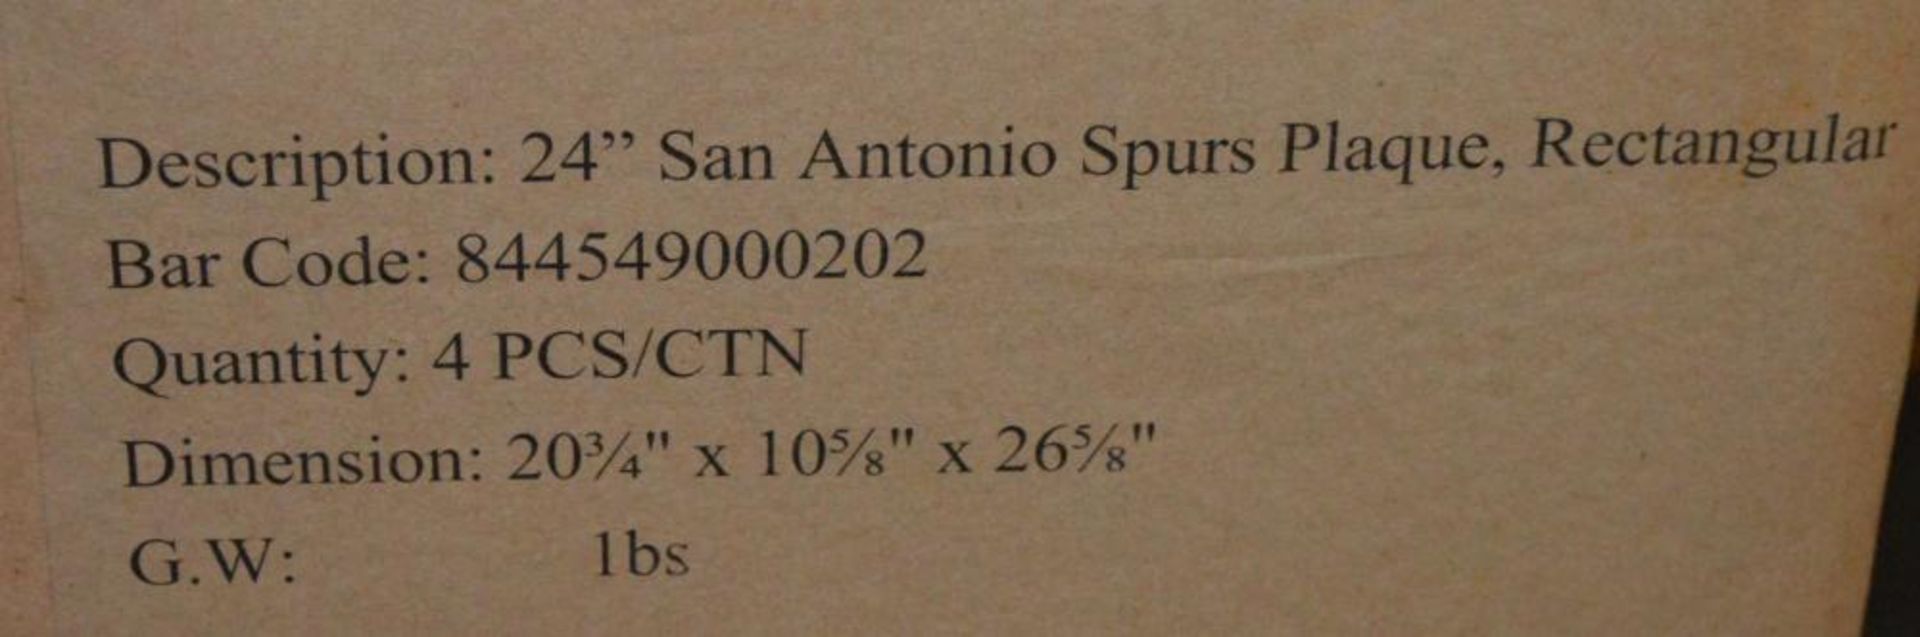 4 x 24" NBA Basketball San Antonio Spurs Rectangular Plaques - New/Boxed - CL185 - Ref: DRT0752 - Lo - Image 4 of 6